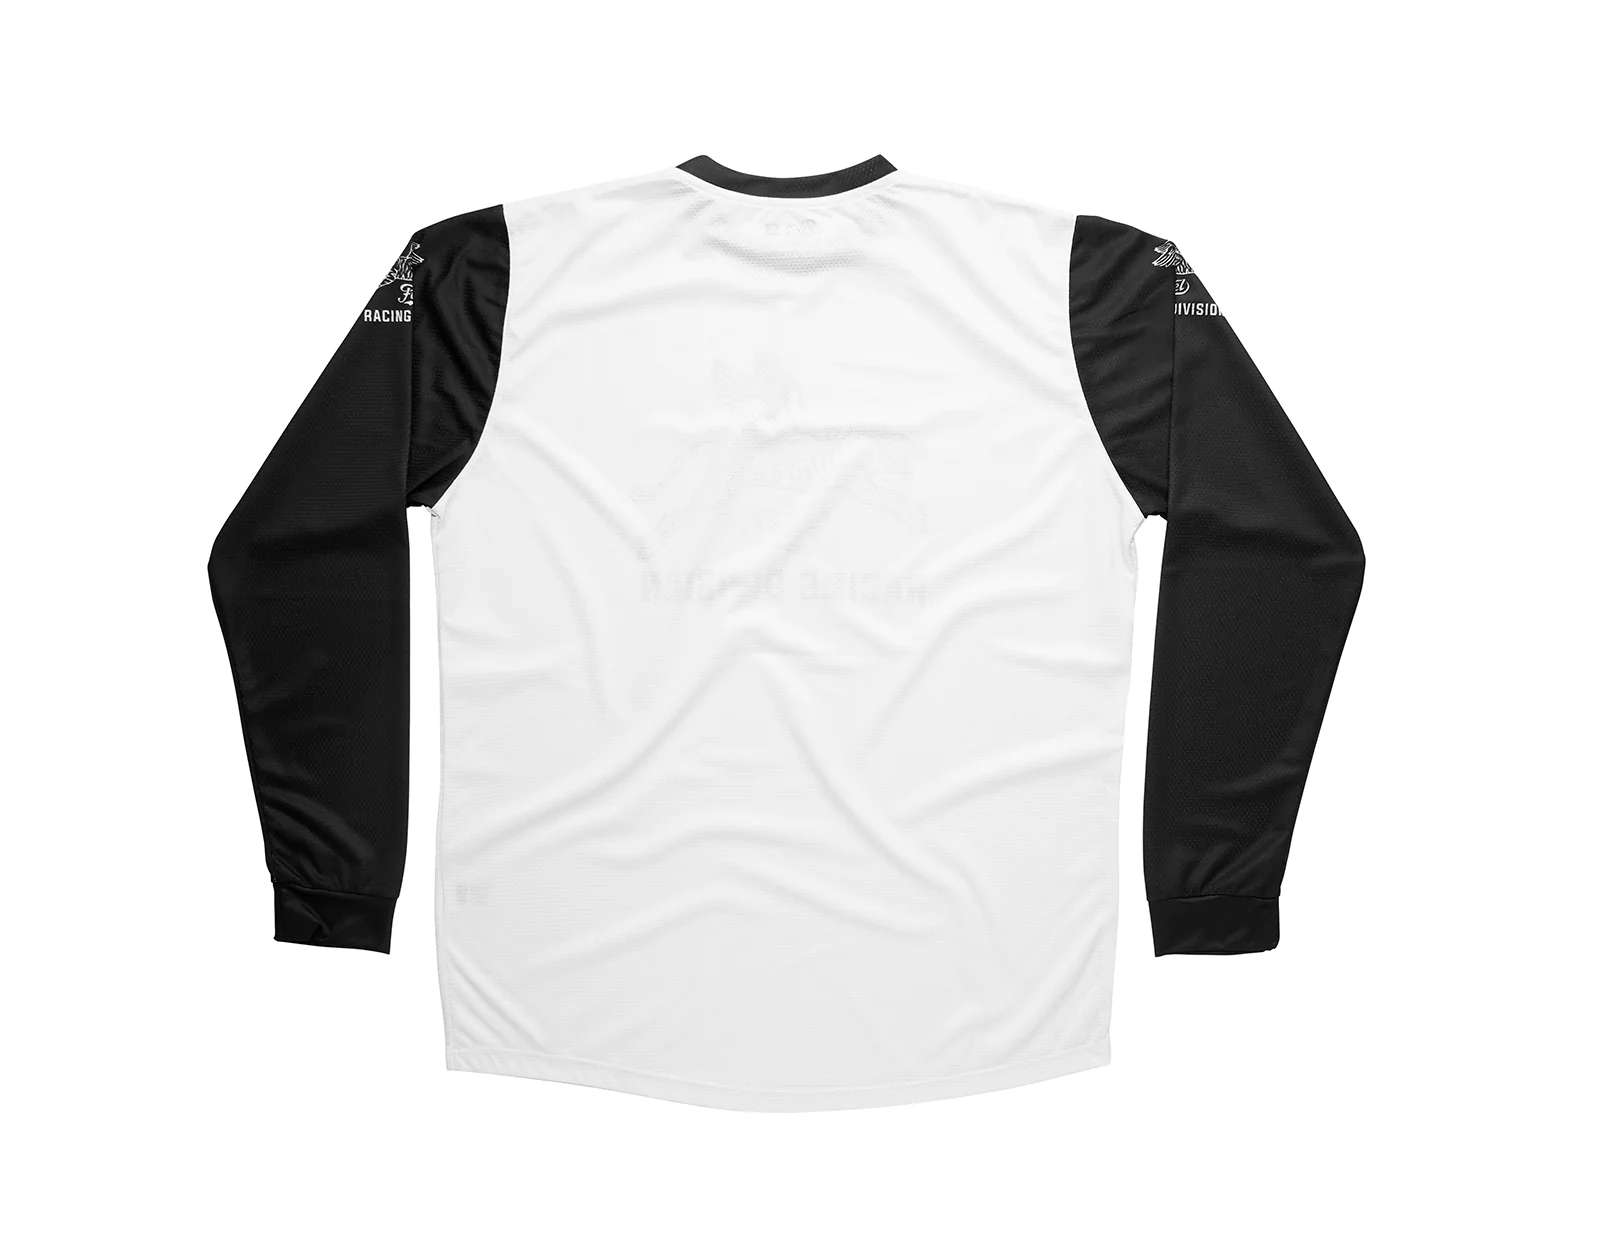 racing-division-jersey-white-back_1800x1800.webp